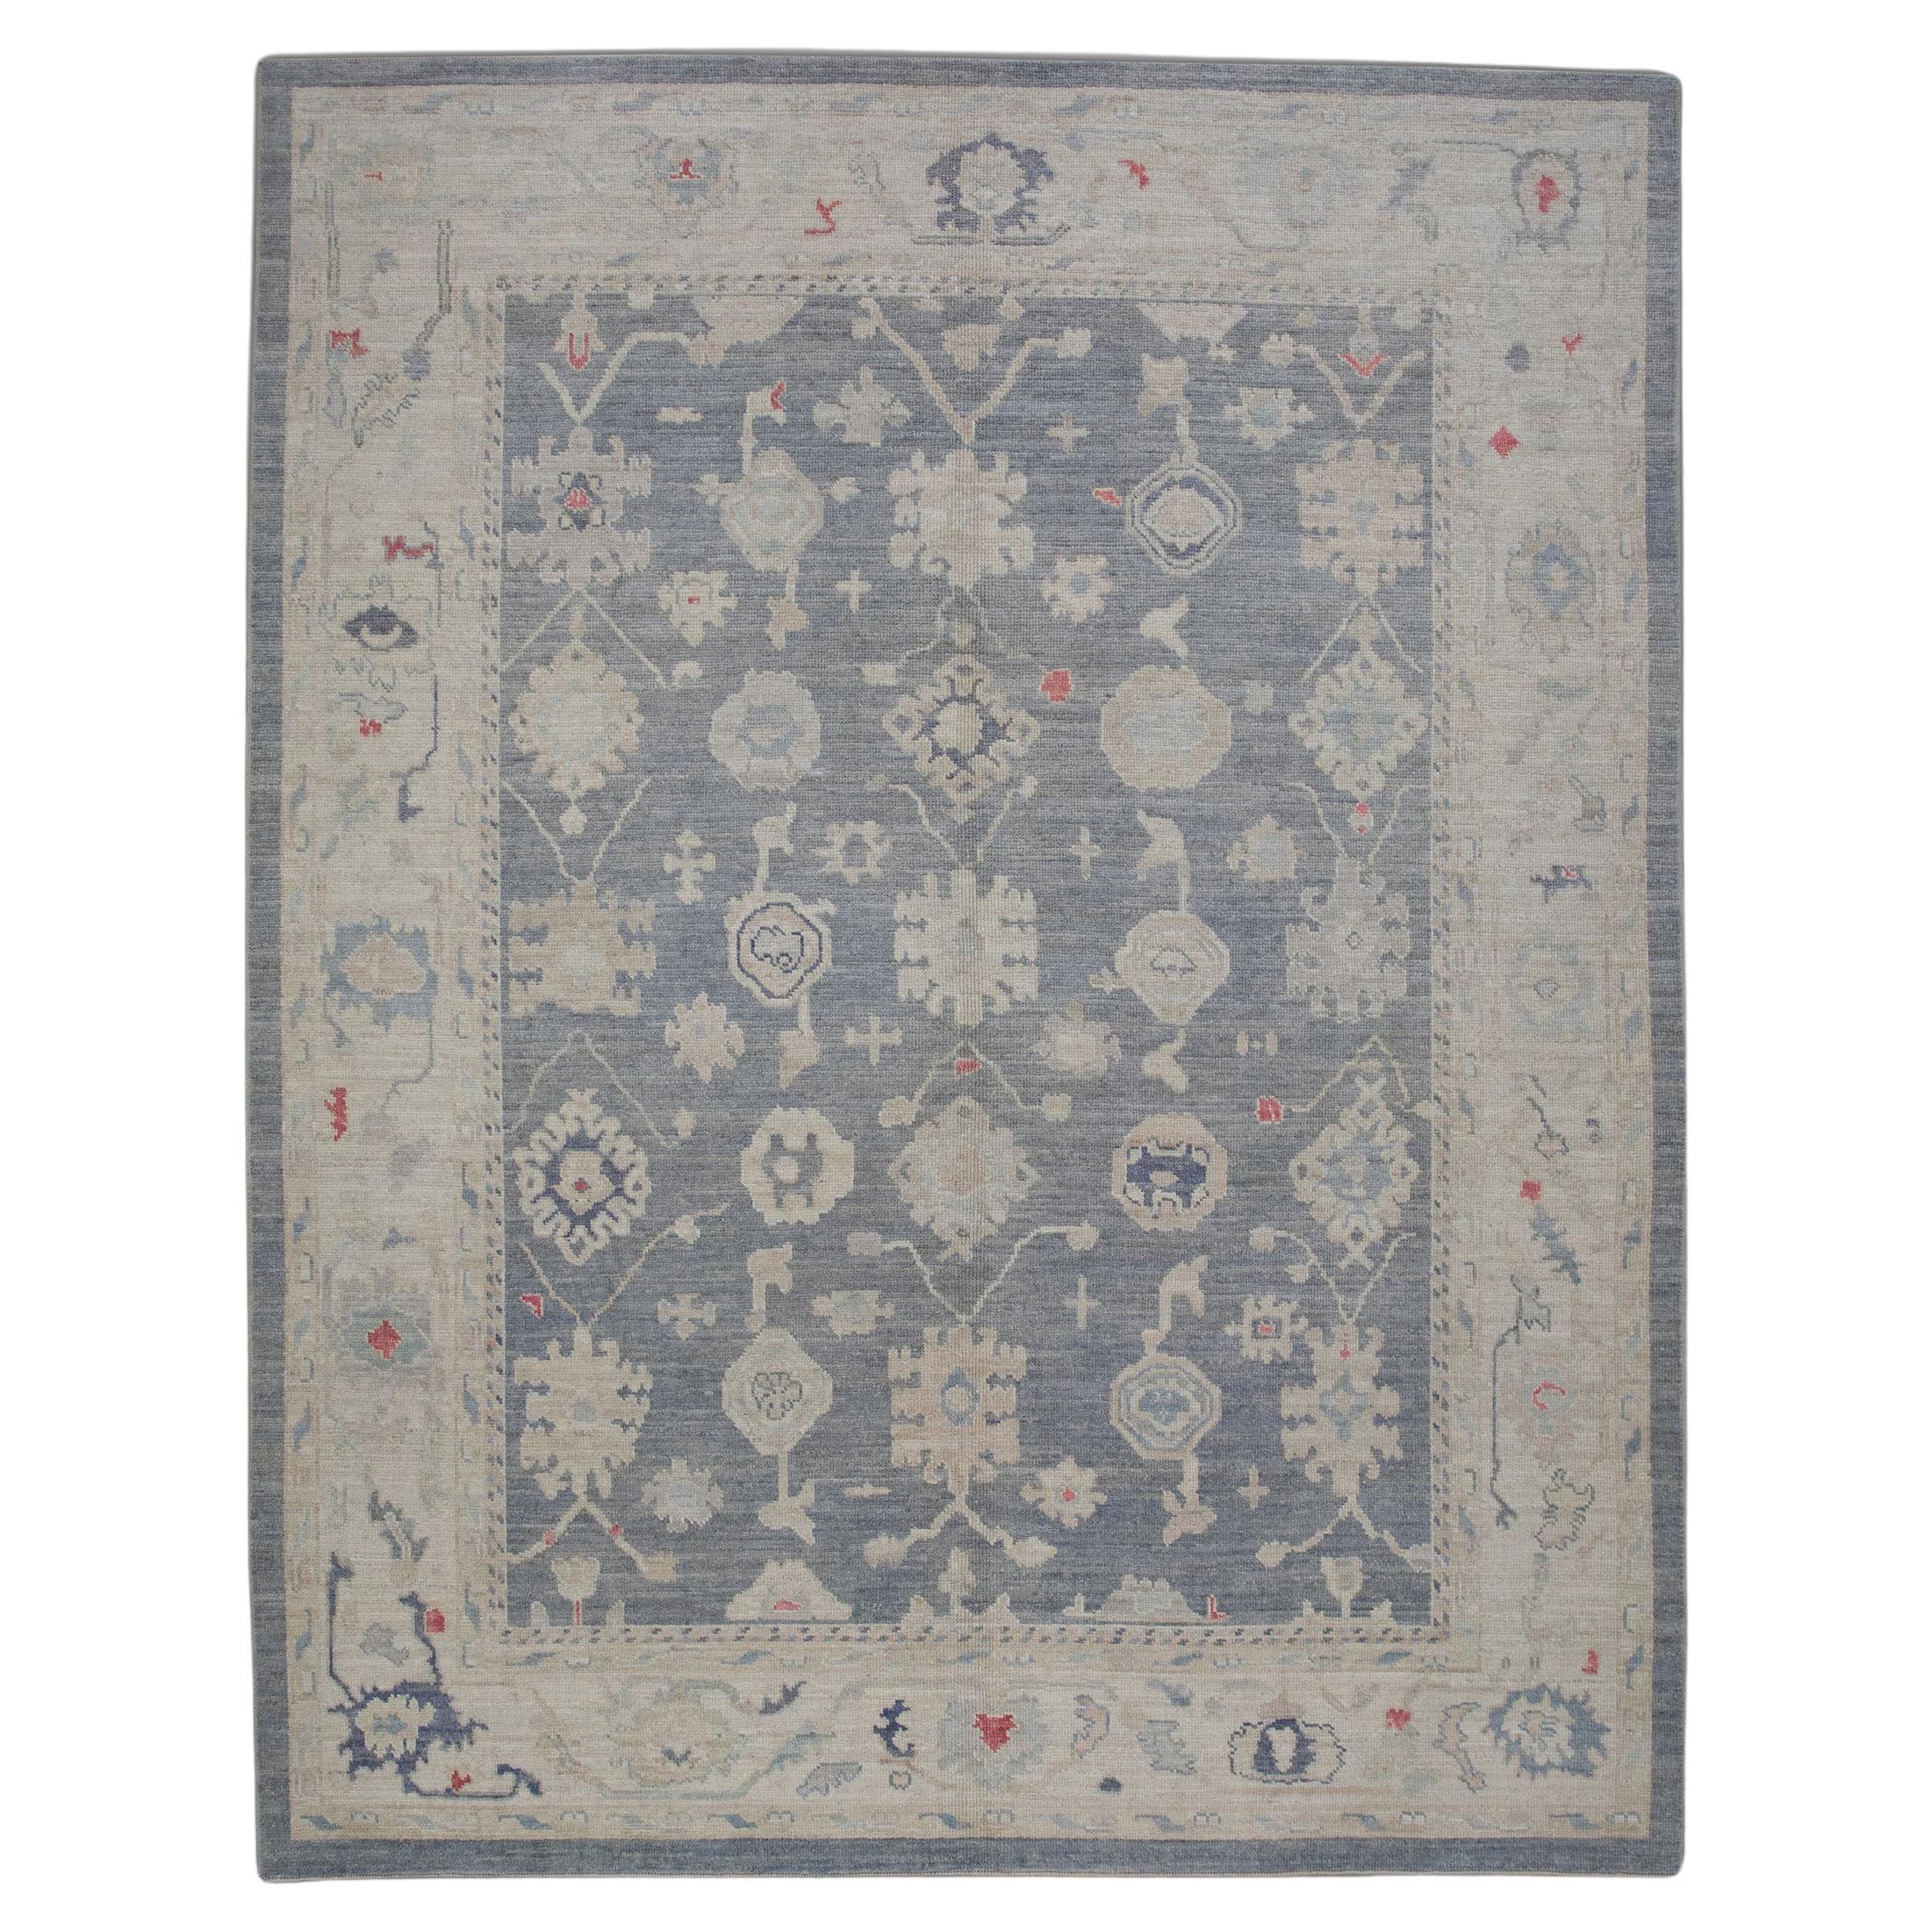 Handwoven Wool Floral Turkish Oushak Rug in Blue, Red, and Cream 8'4" x 10'3" For Sale